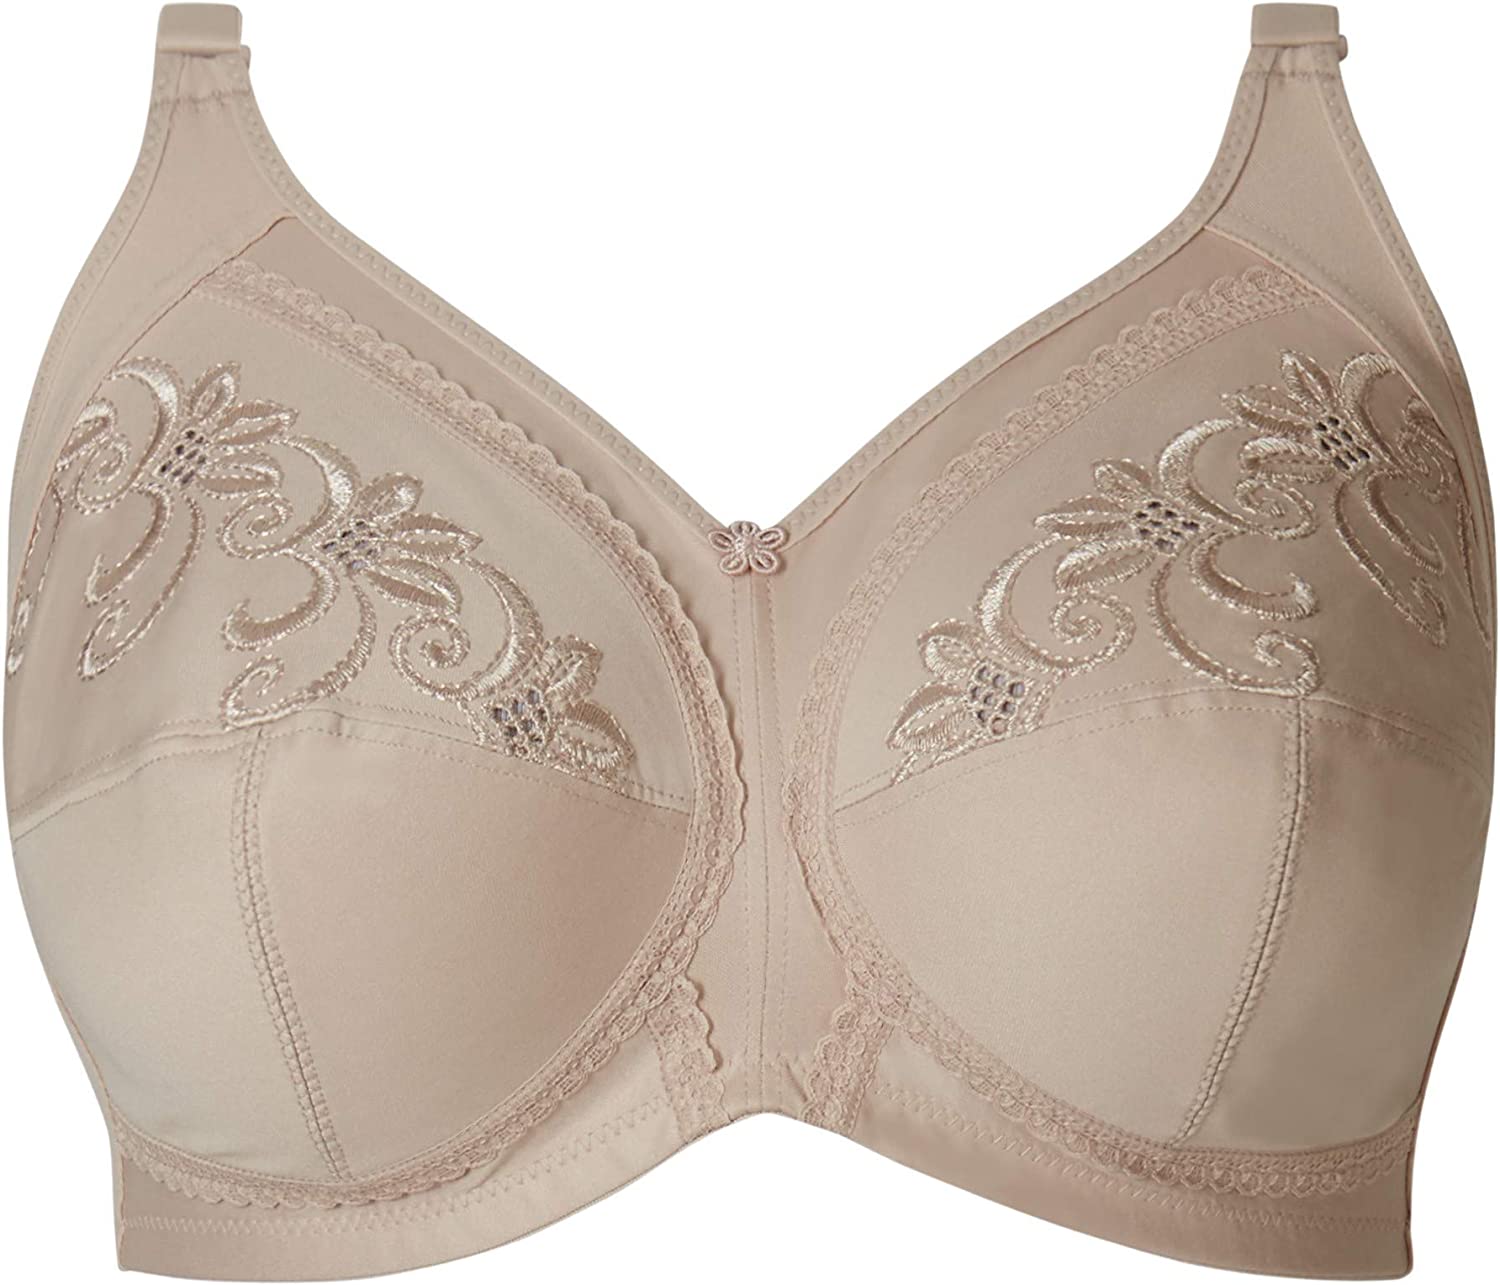 https://www.overshopping.pk/images/uploads/marksspencer-women-s-embroidered-total-support-non-wired-fgxULLACUL.jpg